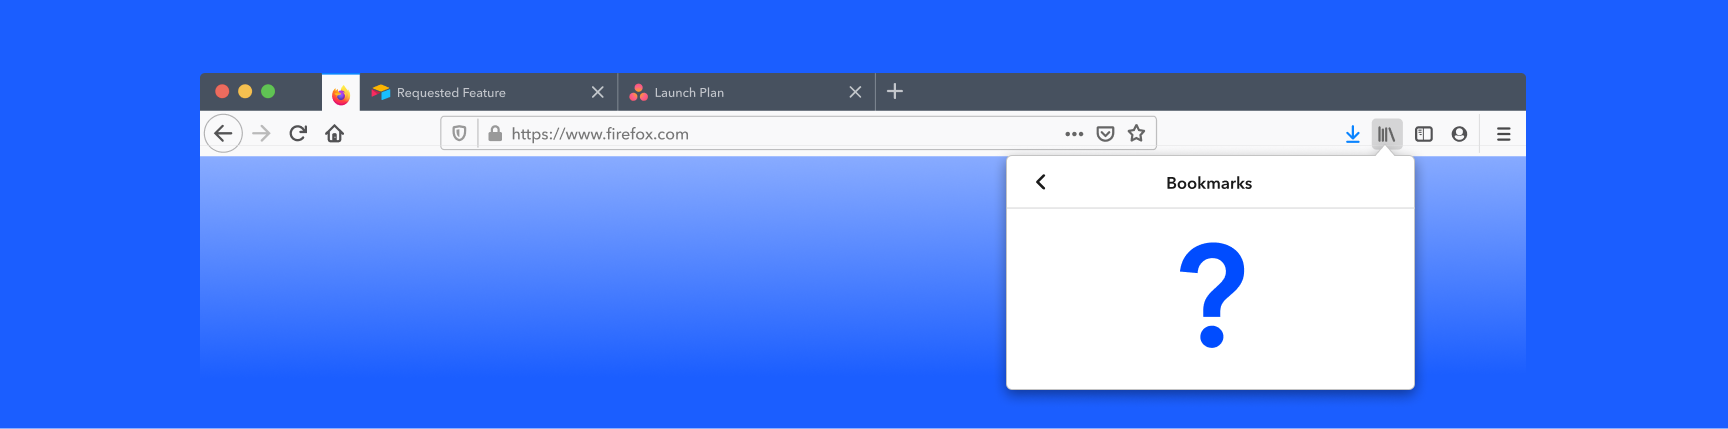 Firefox browser interface with missing or disappeared bookmarks